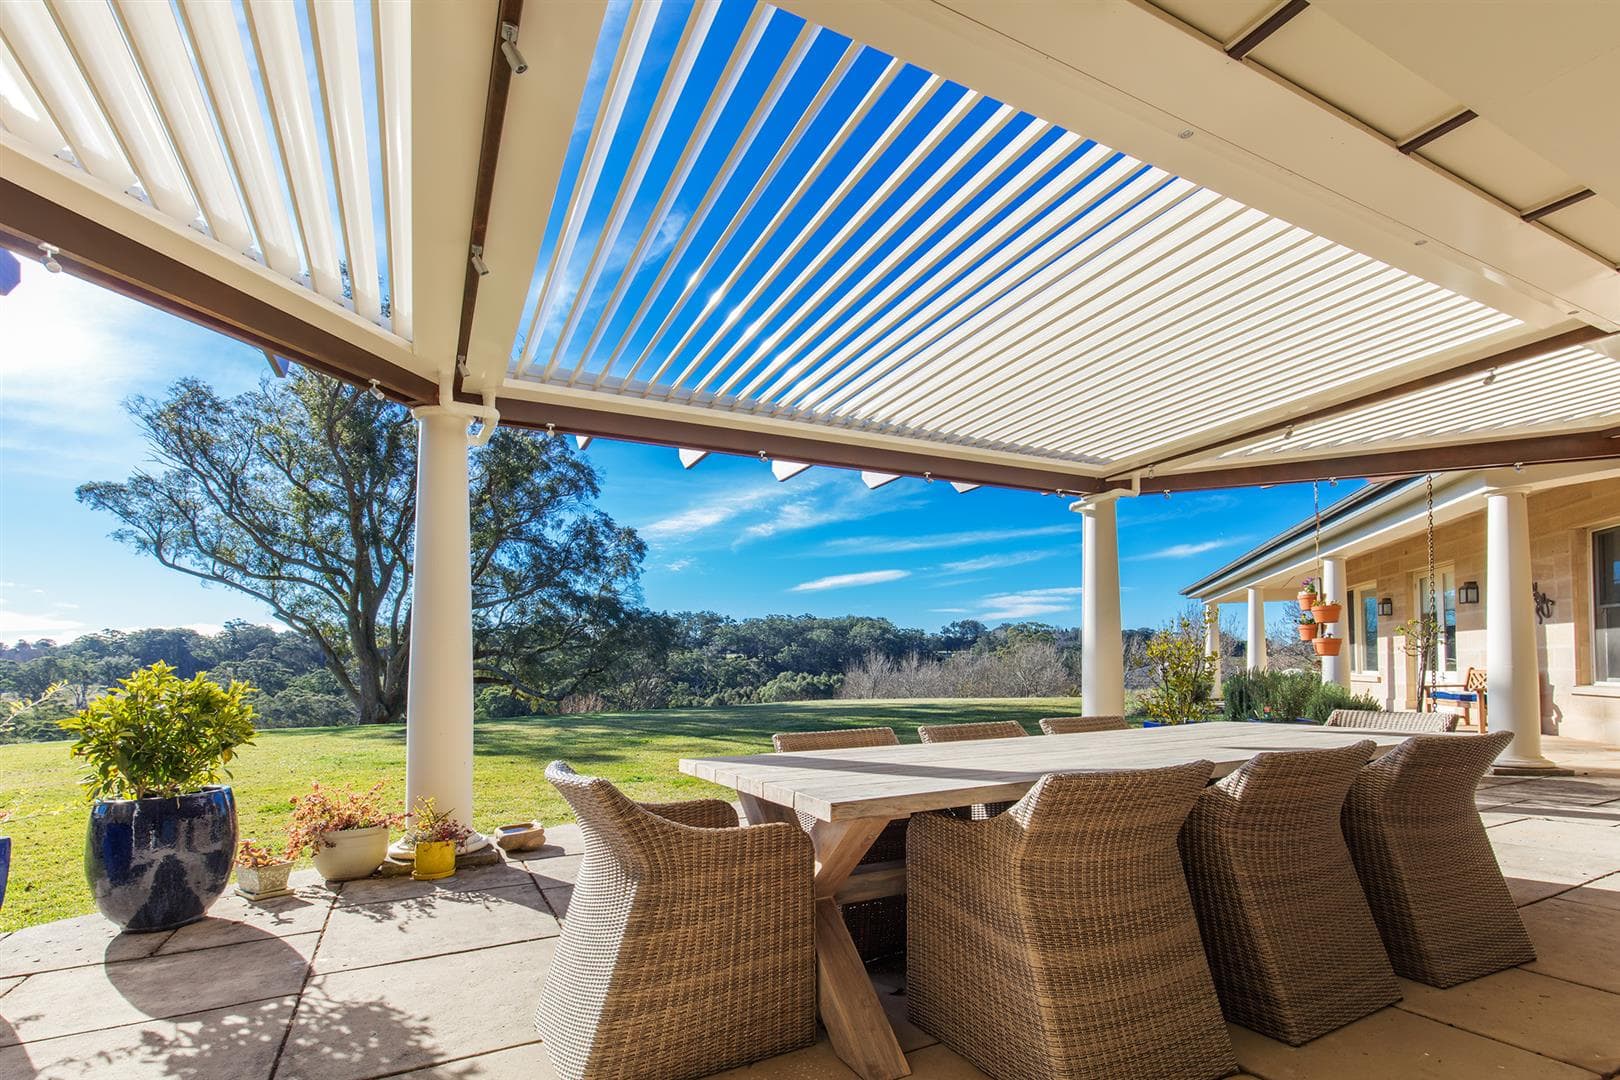 Country style Mitaagong pergola with a magestic view of Southern Highlands.